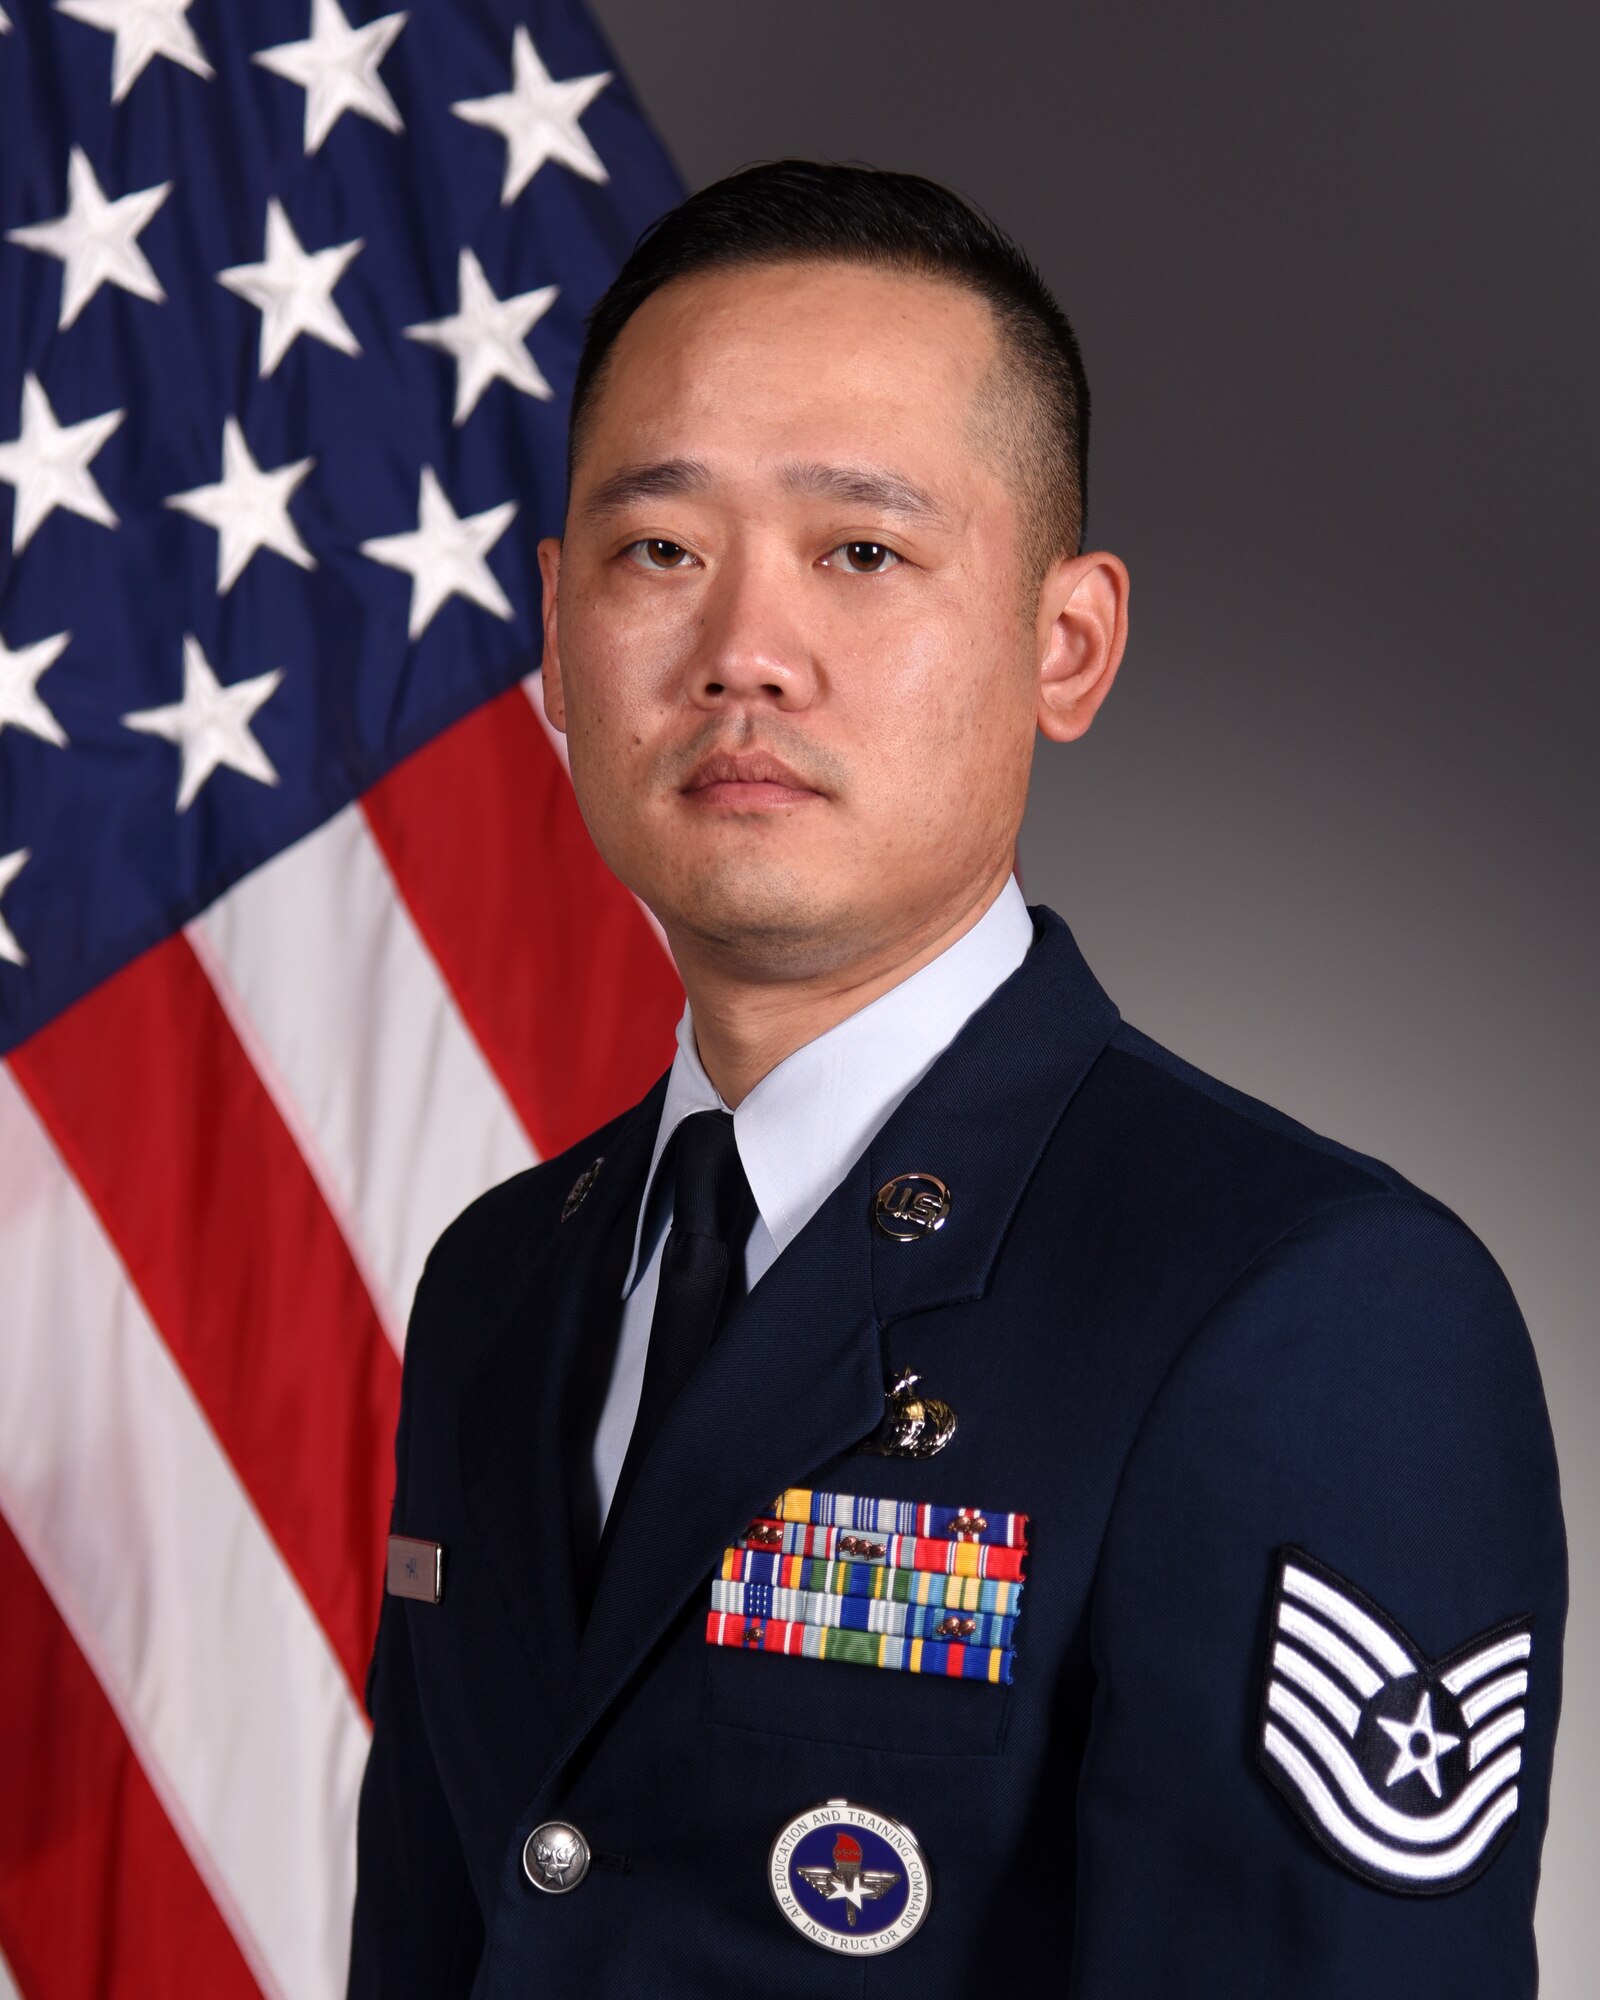 Official portrait of Tech. Sgt. Samuel Han, 316th Training Squadron instructor, taken on Goodfellow Air Force Base, Texas, Jan. 31, 2020. (U.S. Air Force photo by Airman 1st Class Abbey Rieves.)